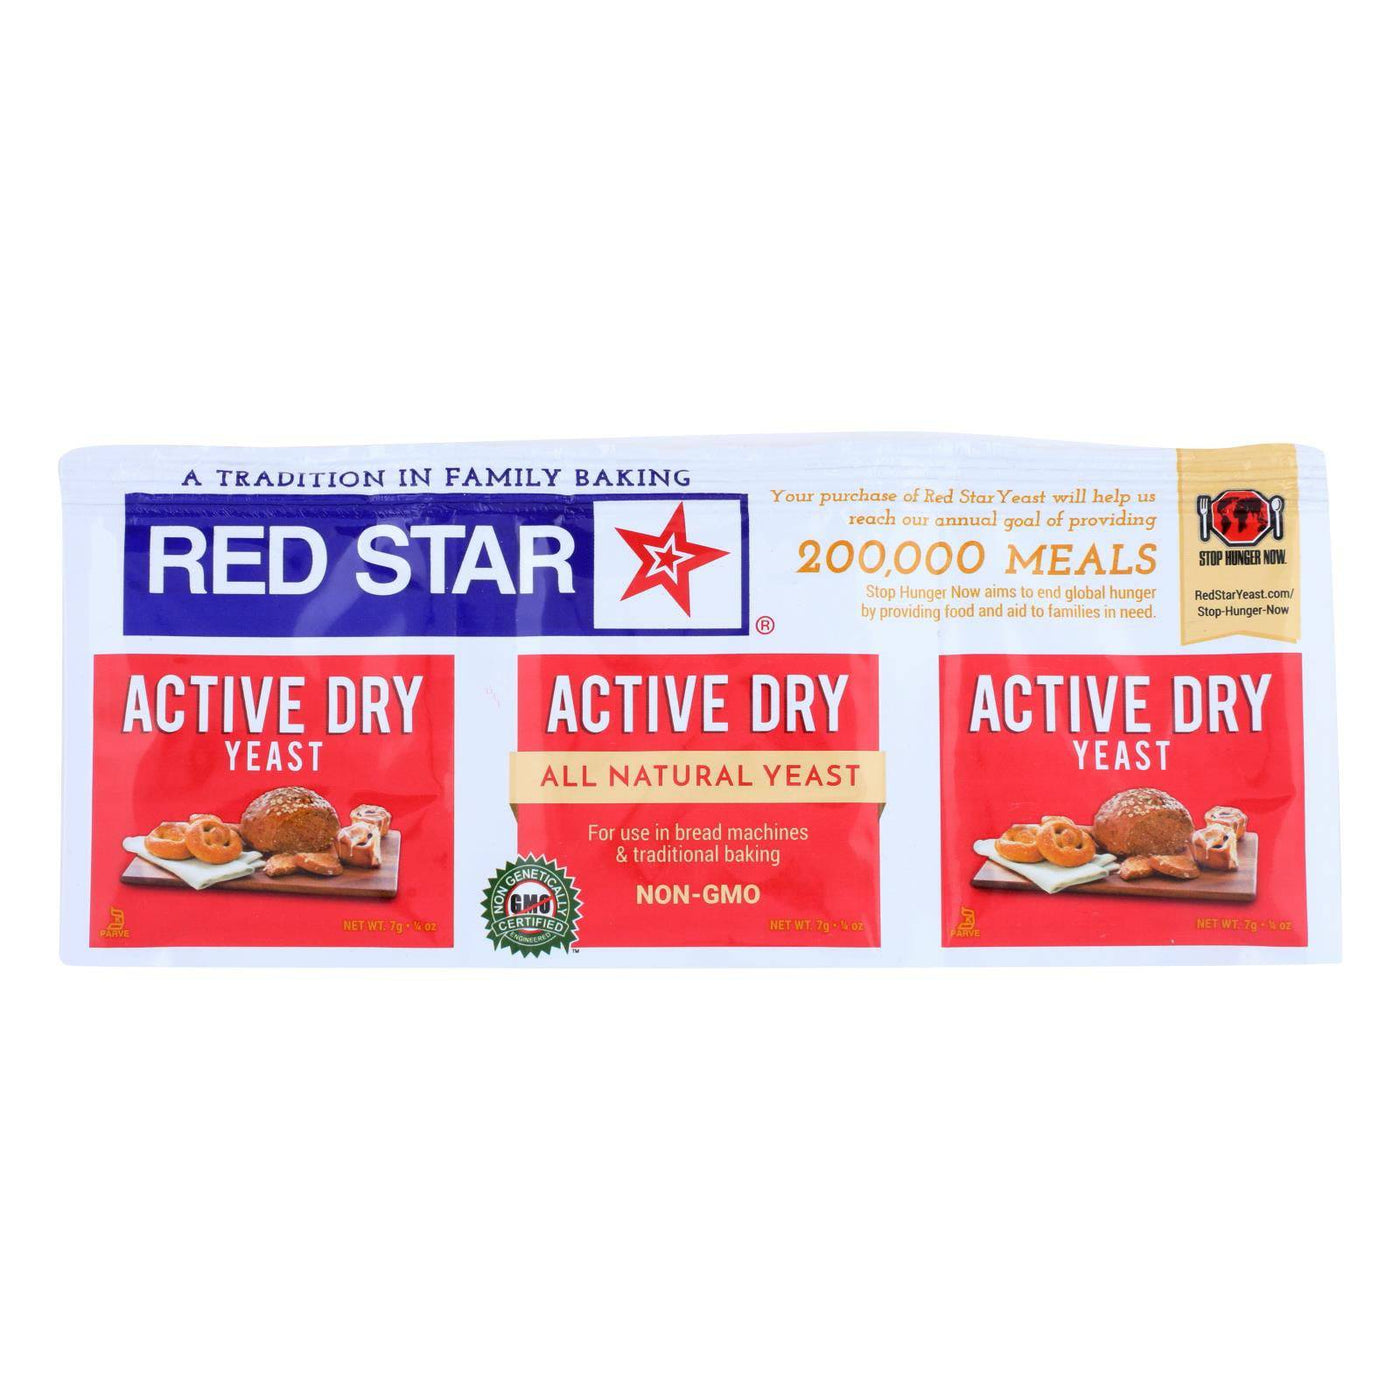 Buy Red Star Nutritional Yeast - Active Dry - .75 Oz - Case Of 18  at OnlyNaturals.us